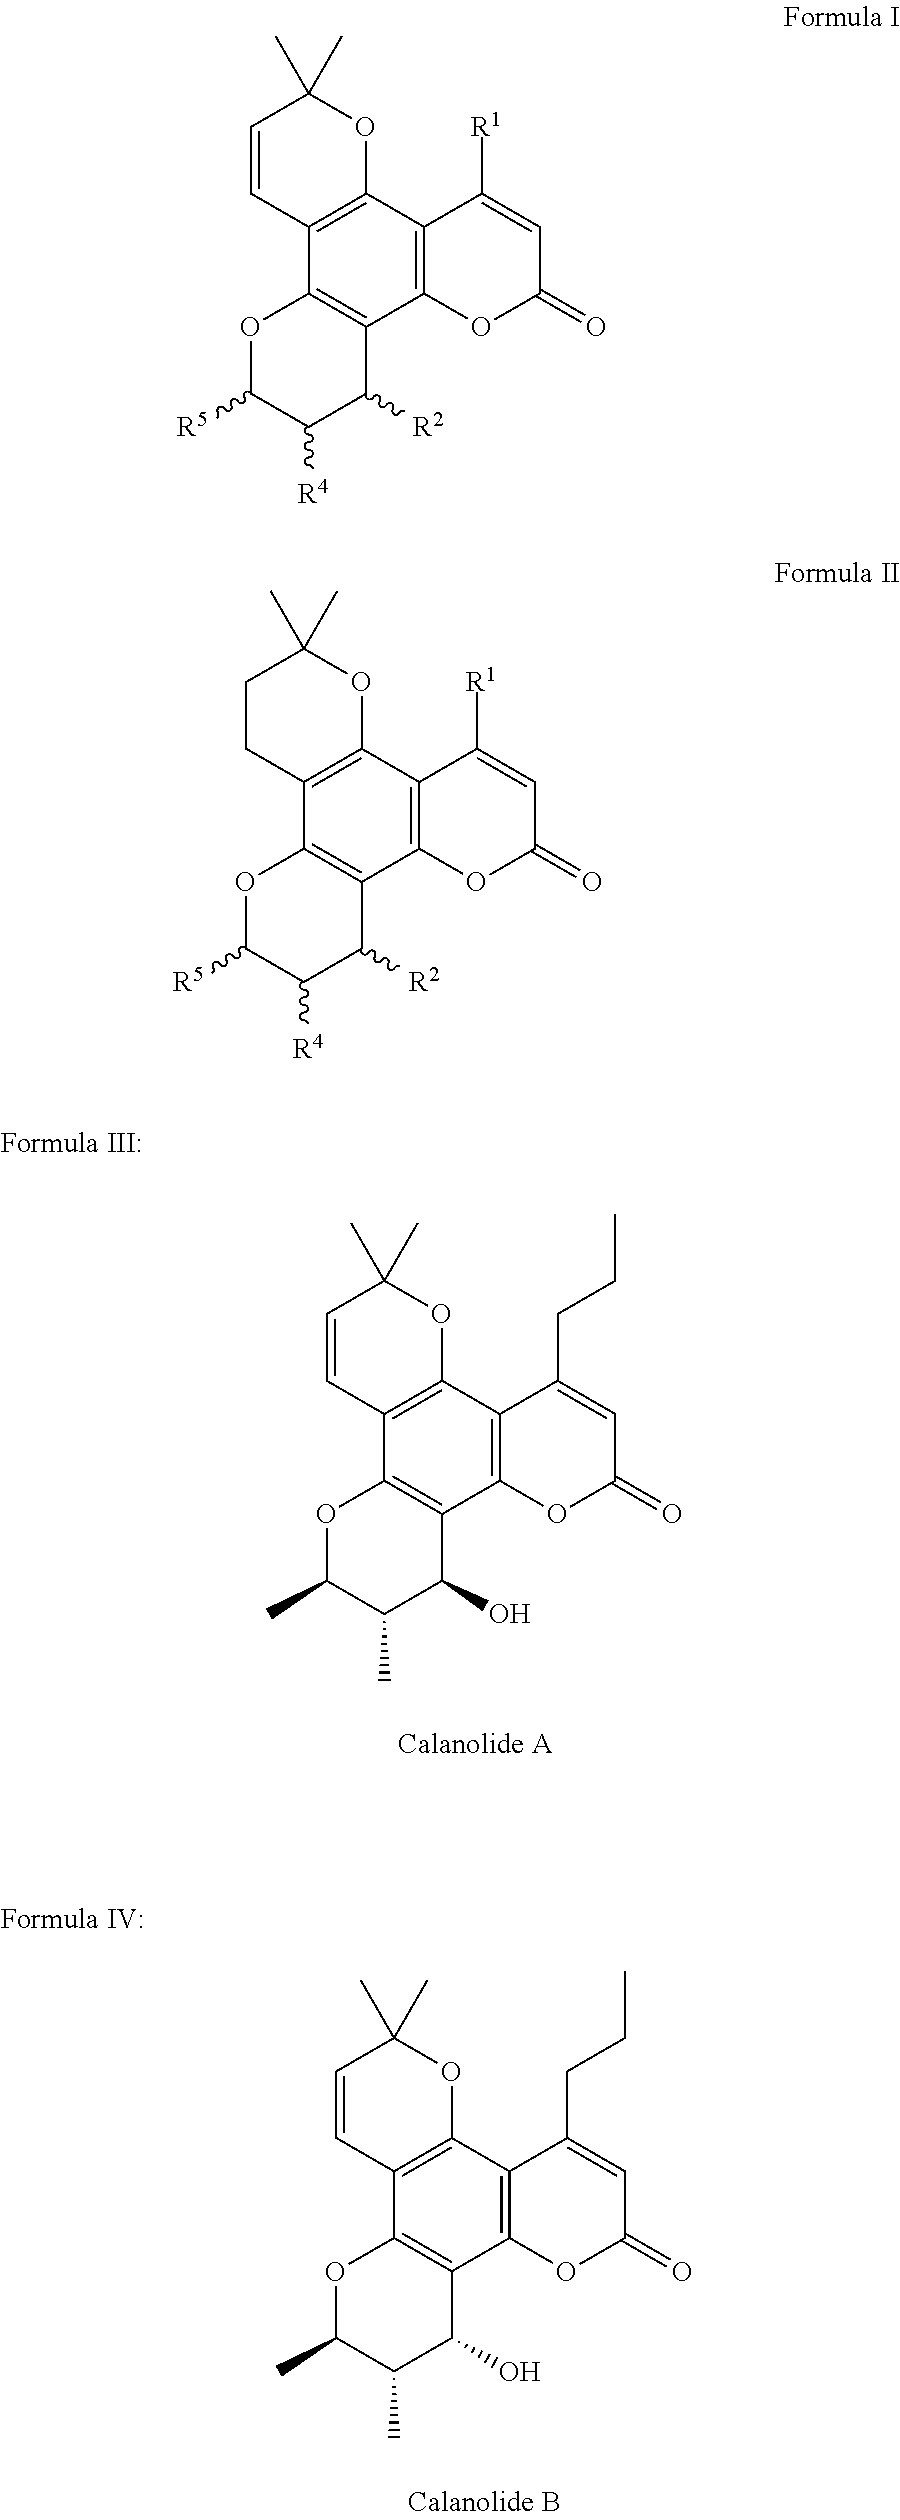 Pharmaceutical compositions for calanolides, their derivatives and analogues, and process for producing the same